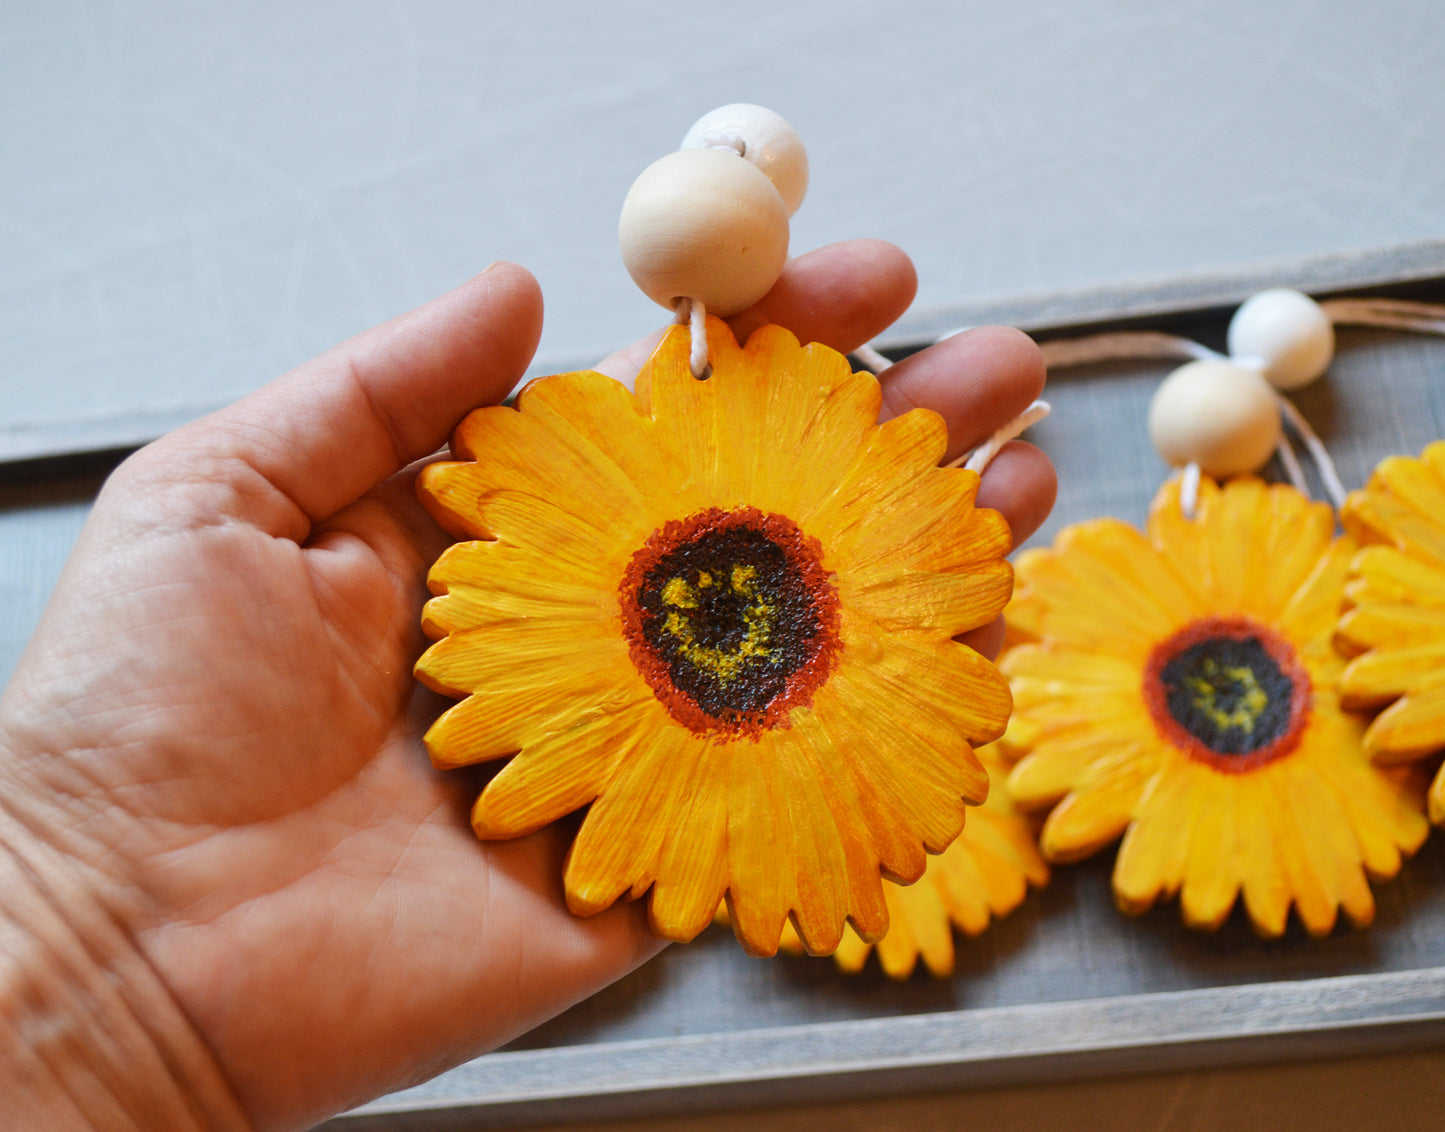 Essential oil diffuser sunflower flower car charm ornament / Make your ride smell awesome / FREE SHIPPING